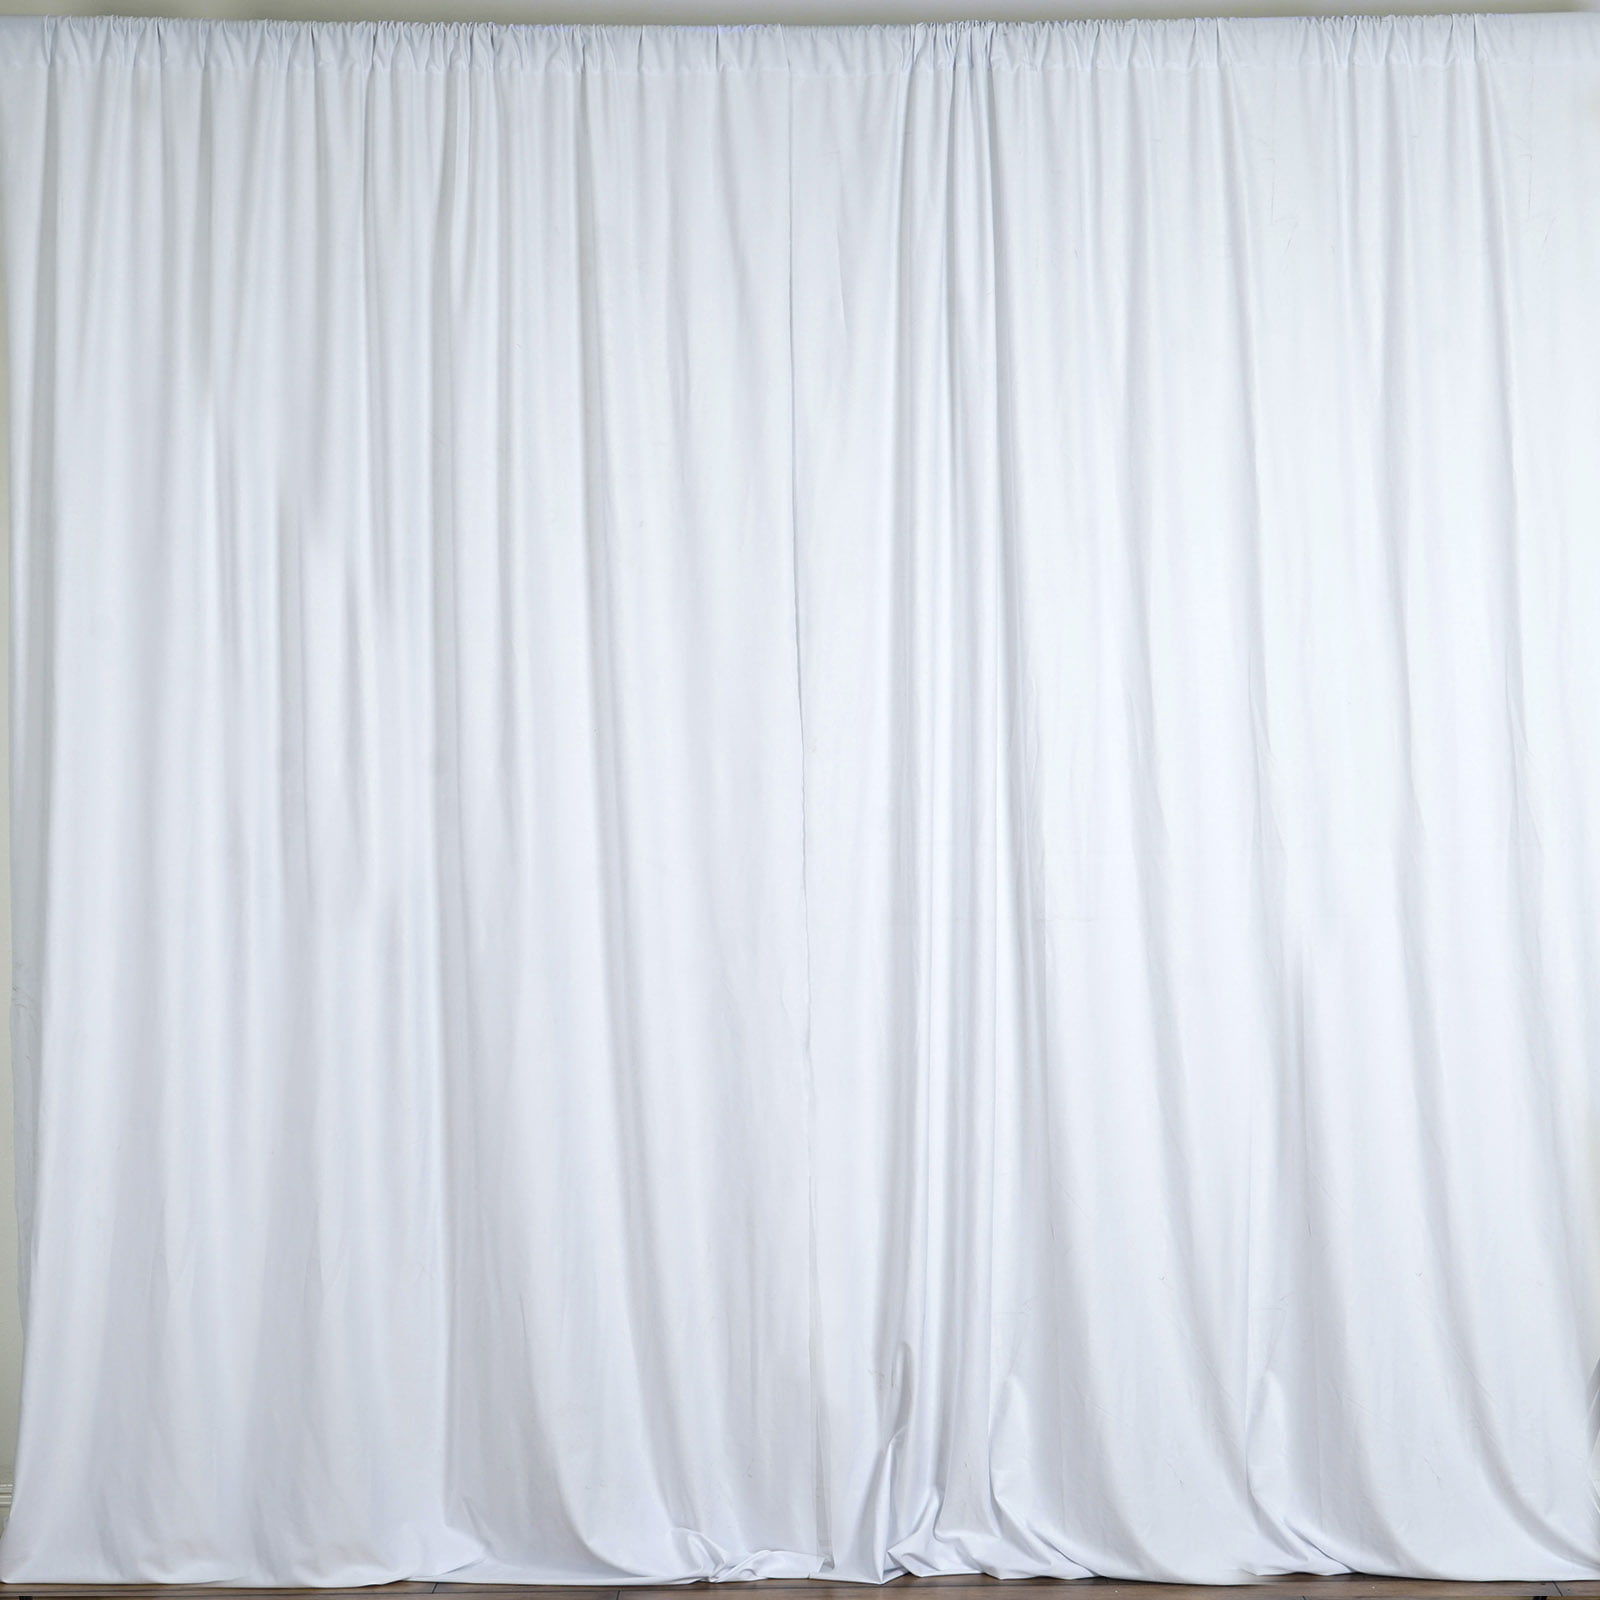 10 ft x 10 ft Polyester Photography Backdrop Drapes/Curtains Panels 